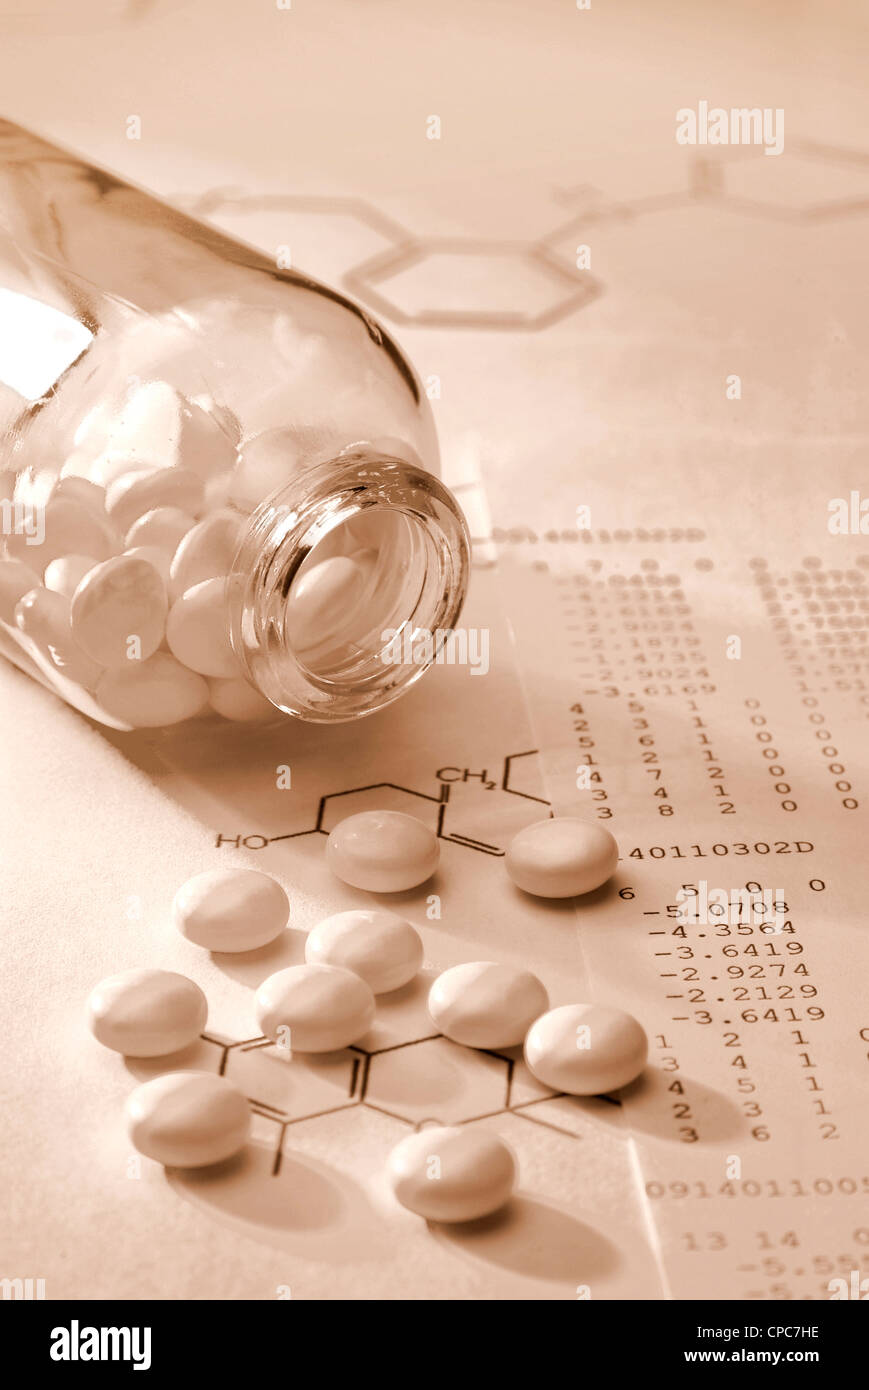 Tablets in a glass vial and structural formula. Stock Photo